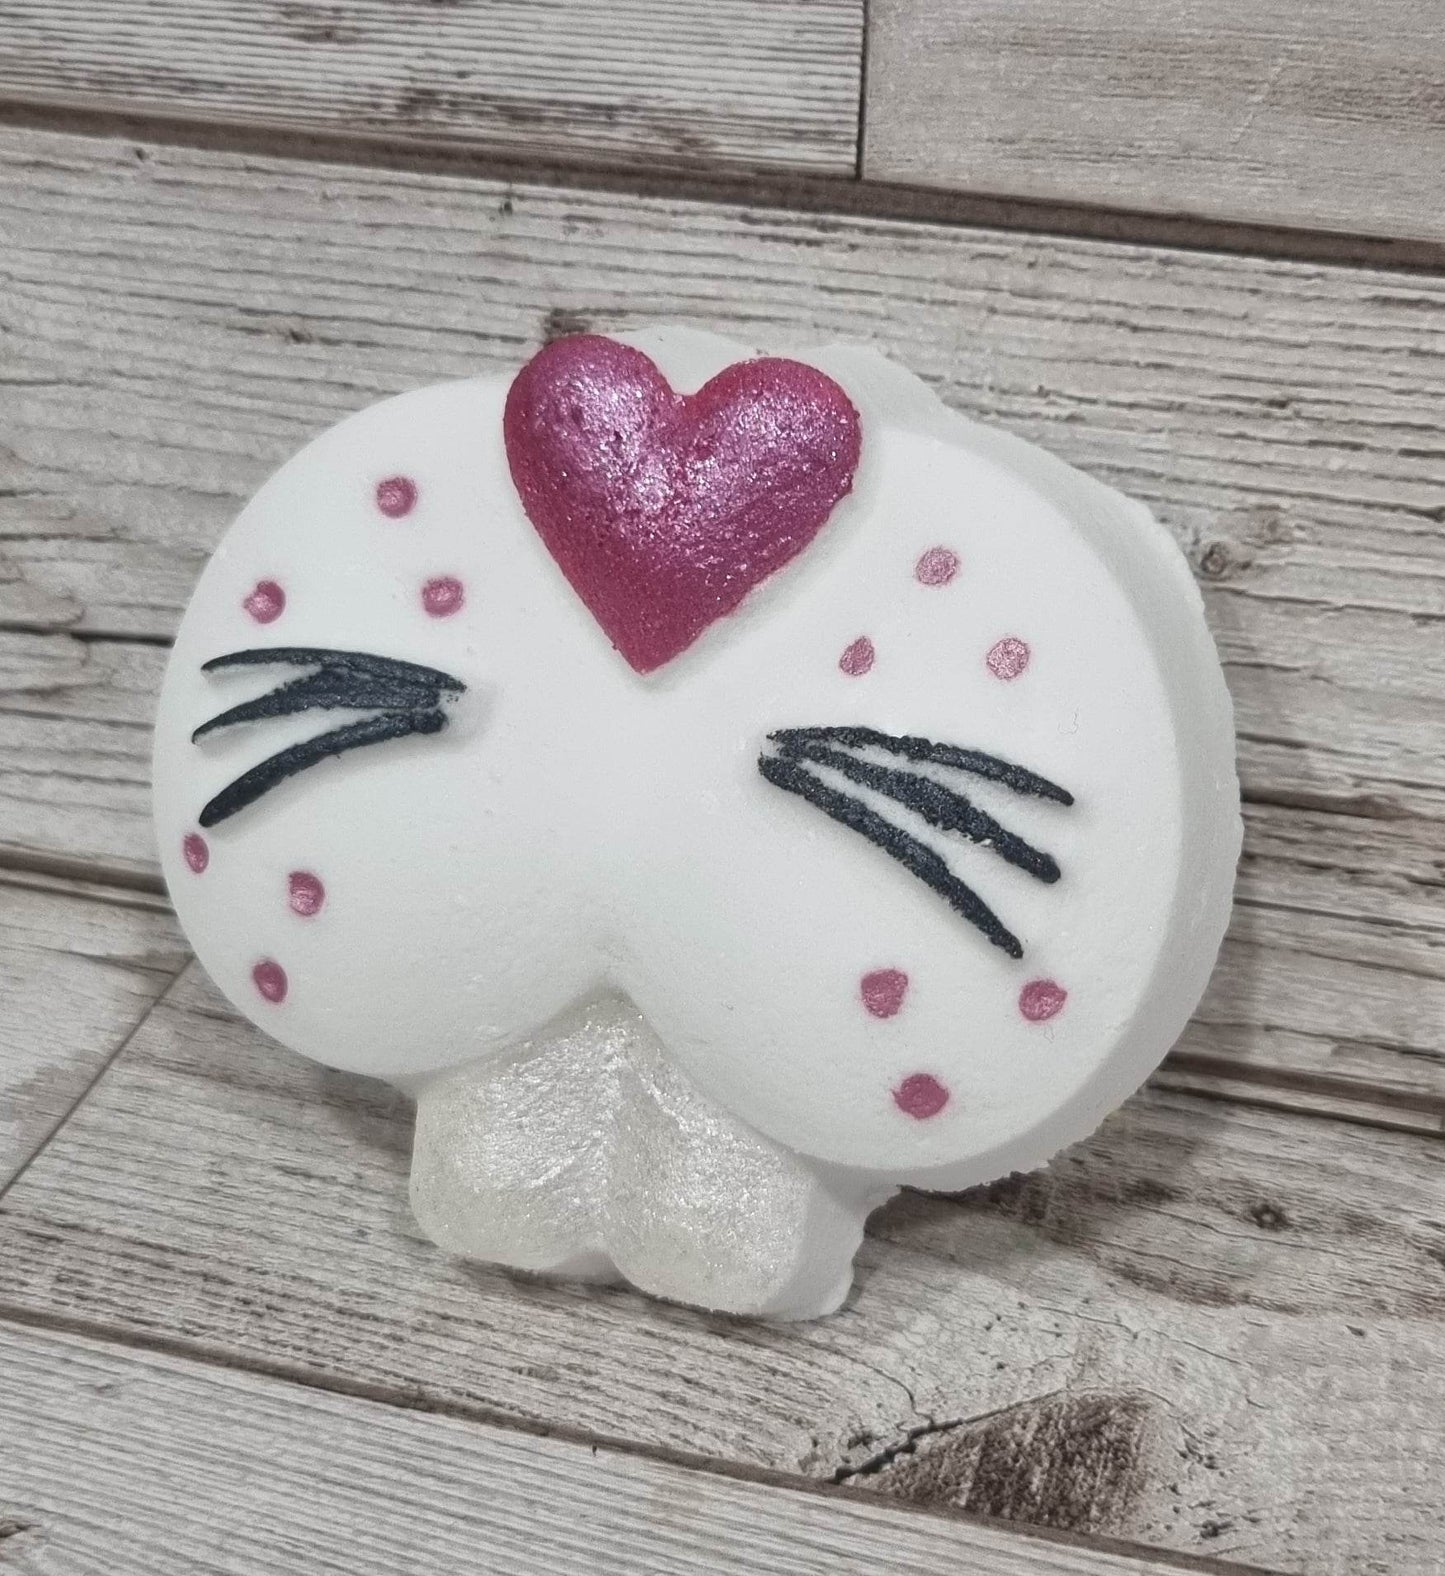 'Some bunny loves you' Bath Bomb